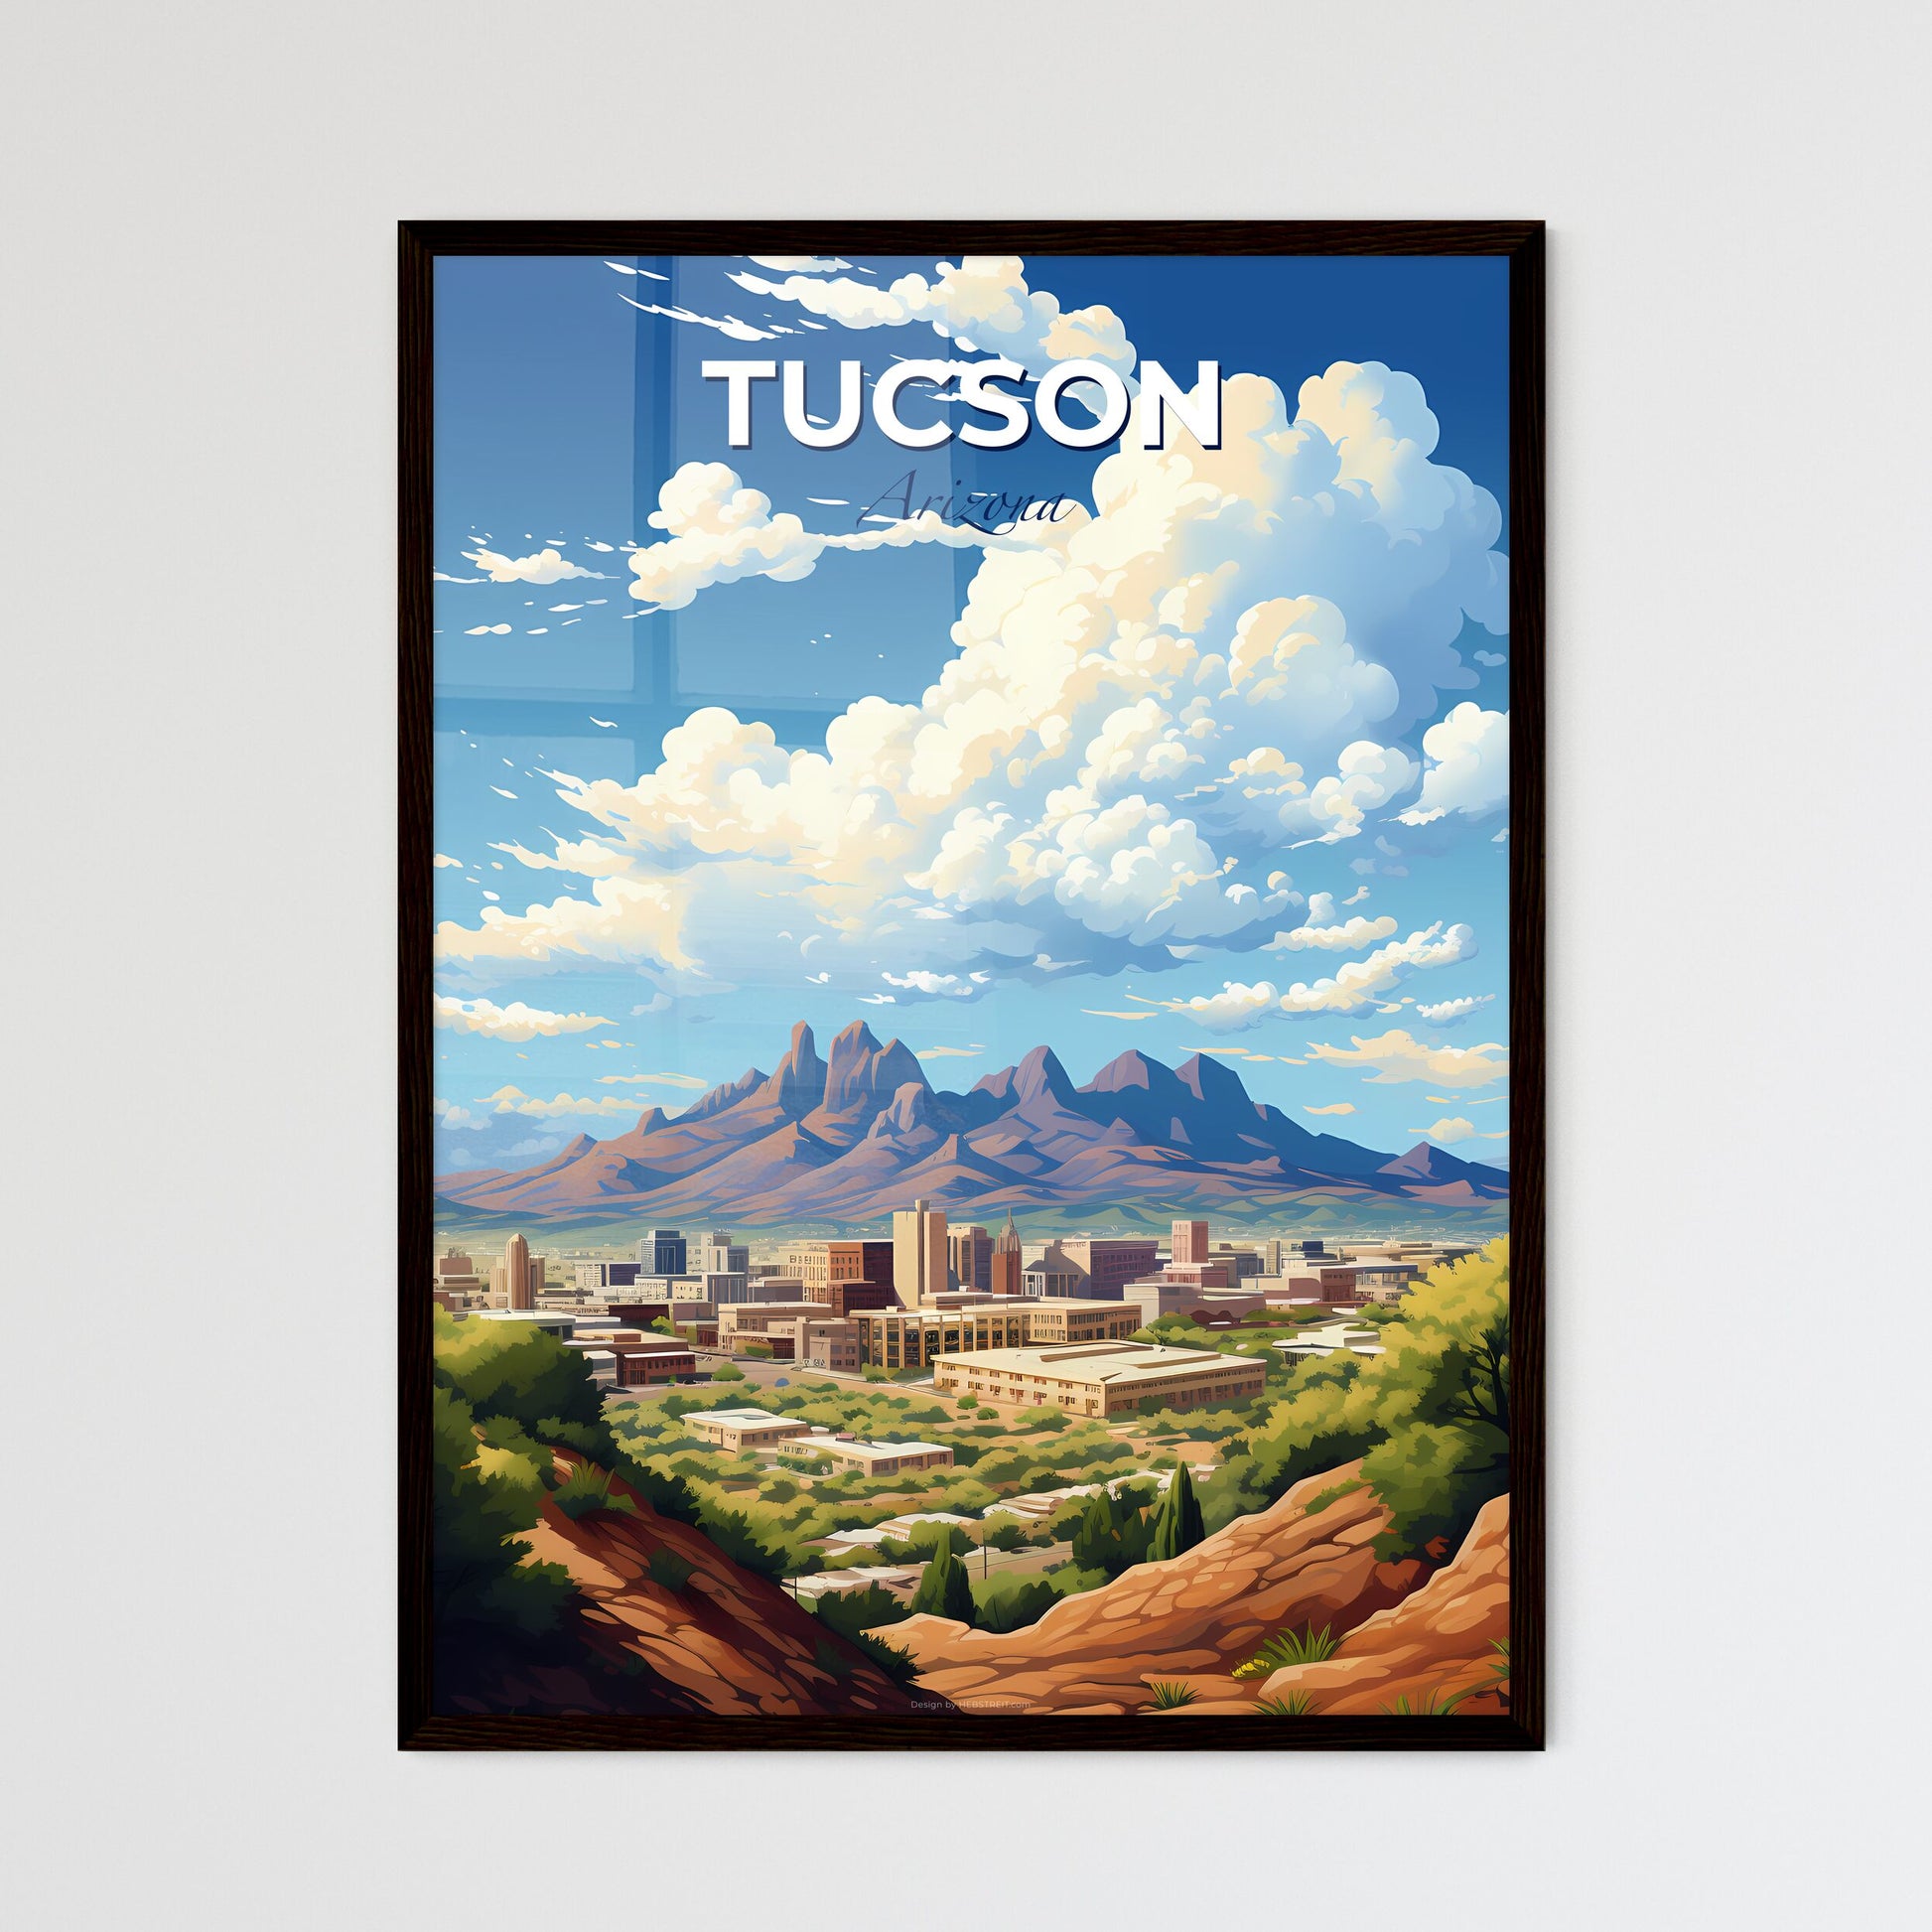 Tucson Arizona Skyline - A Landscape Of A City With Mountains In The Background - Customizable Travel Gift Default Title